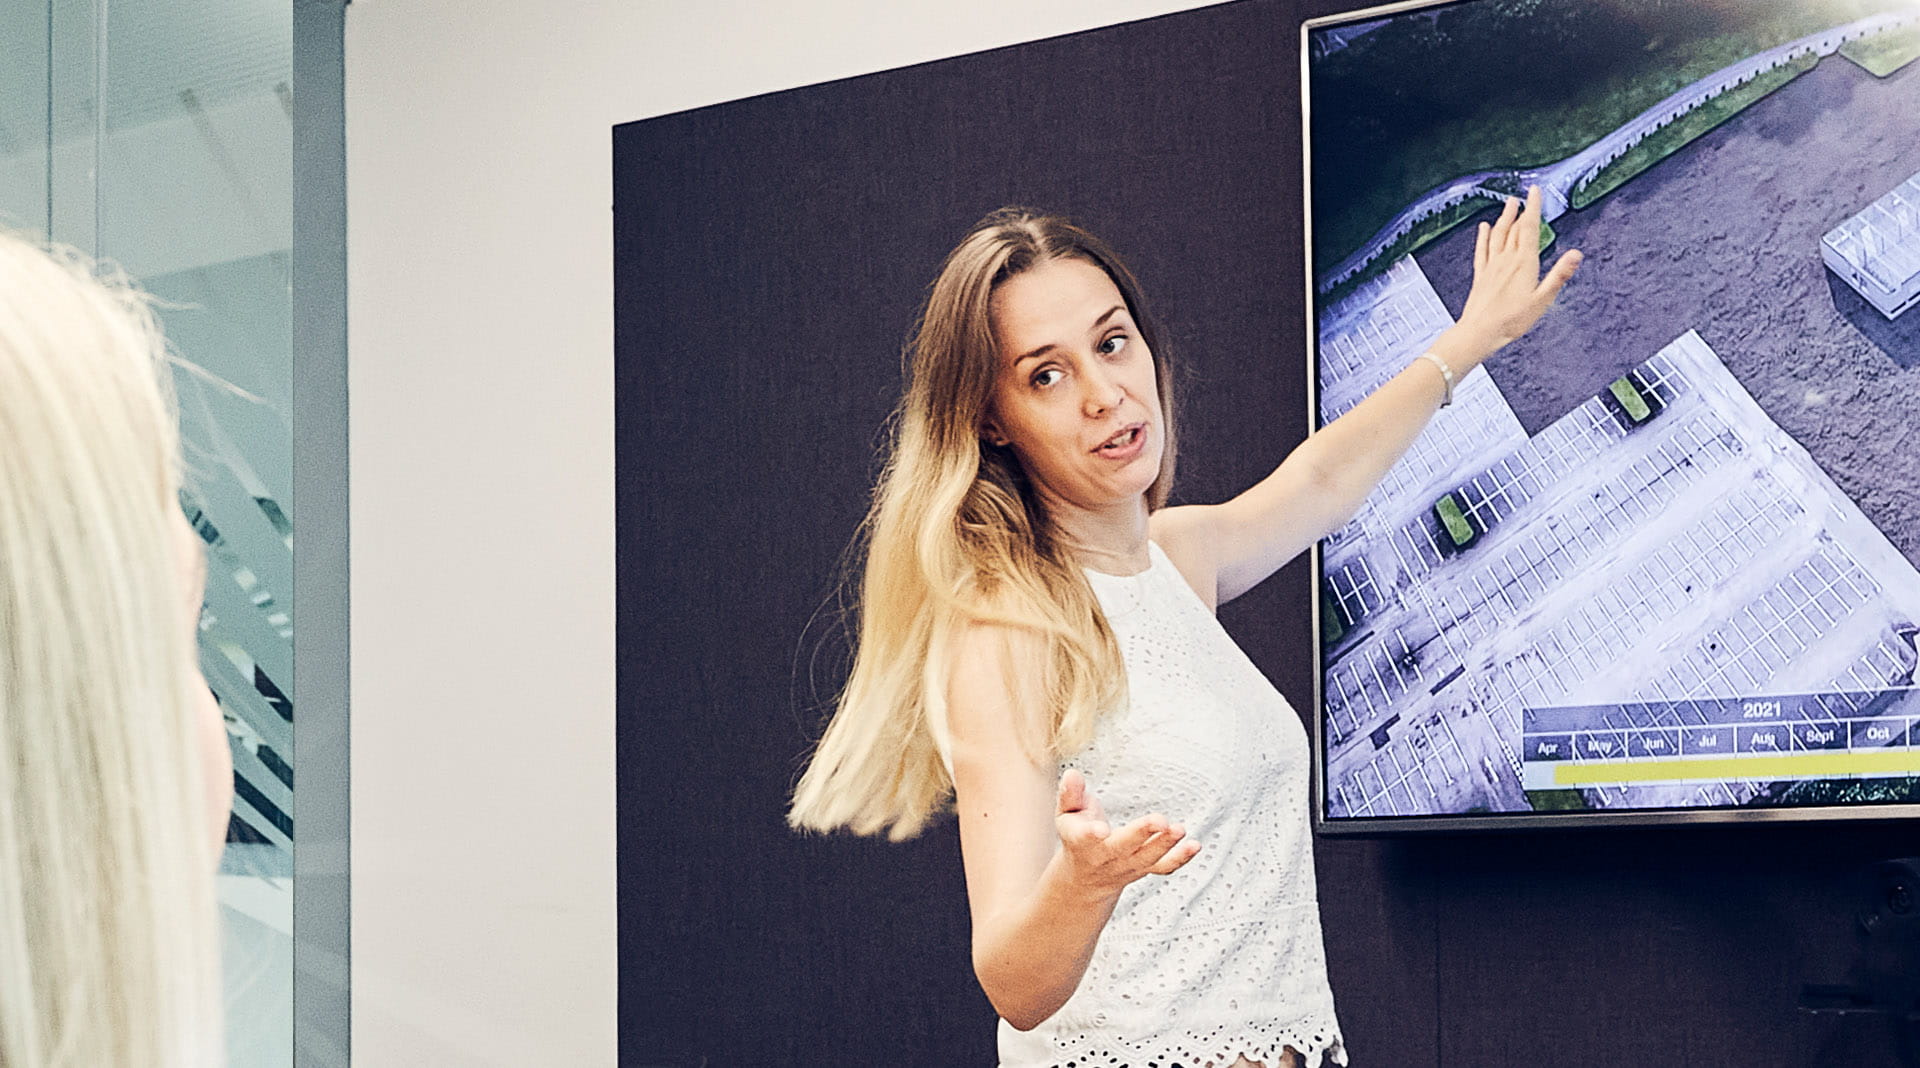 Female ISG employee giving a presentation with aerial image of a construction site